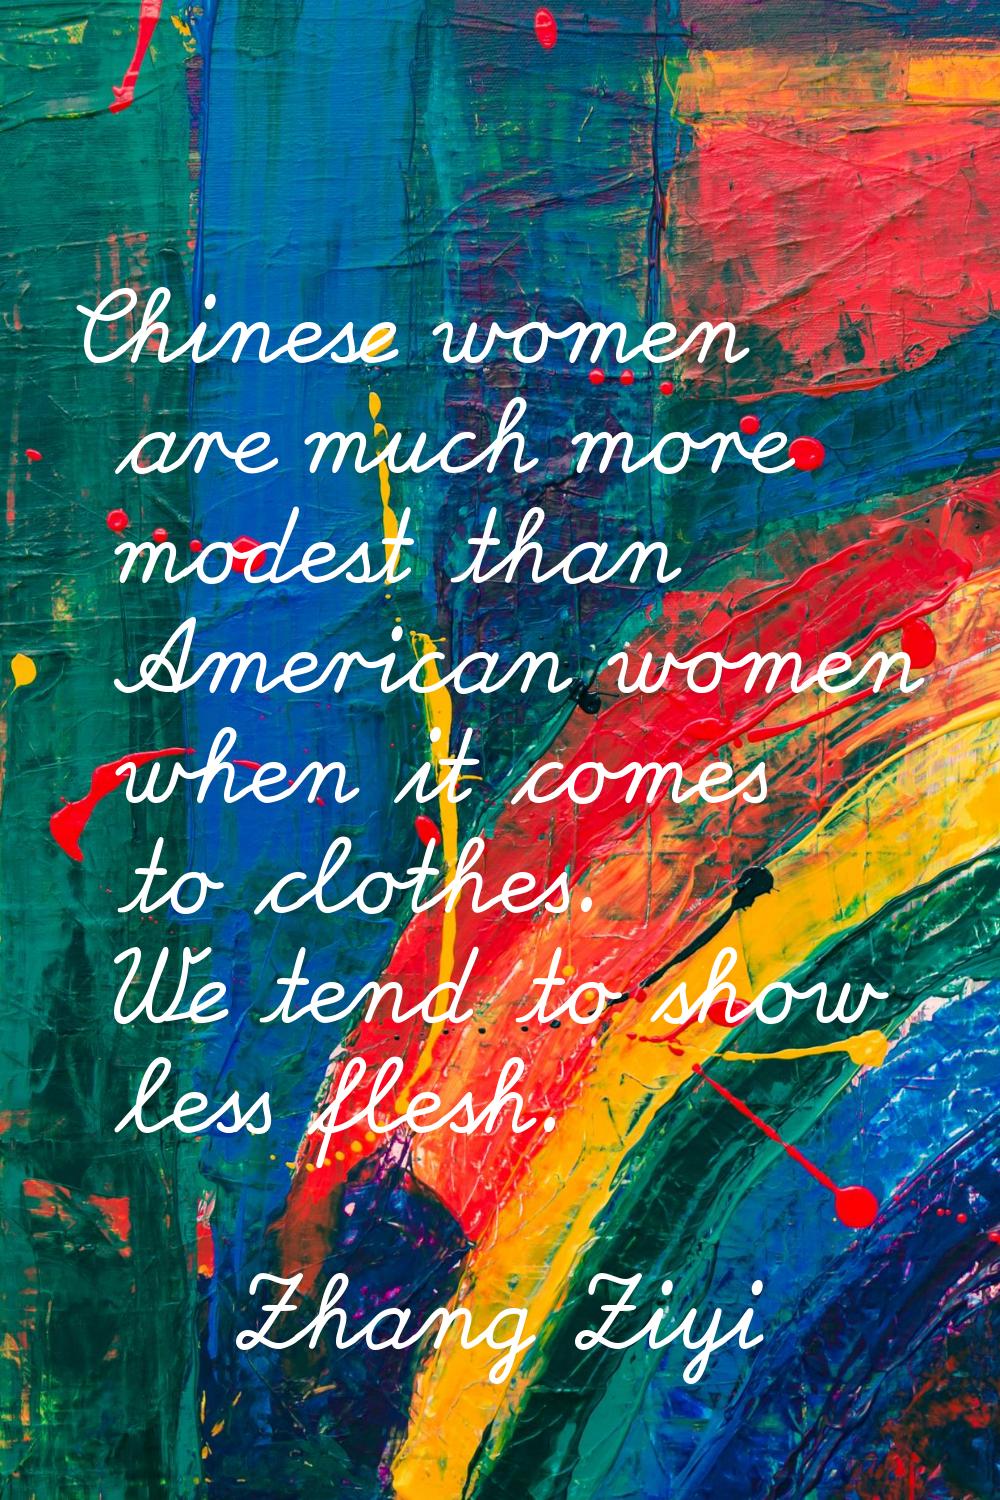 Chinese women are much more modest than American women when it comes to clothes. We tend to show le